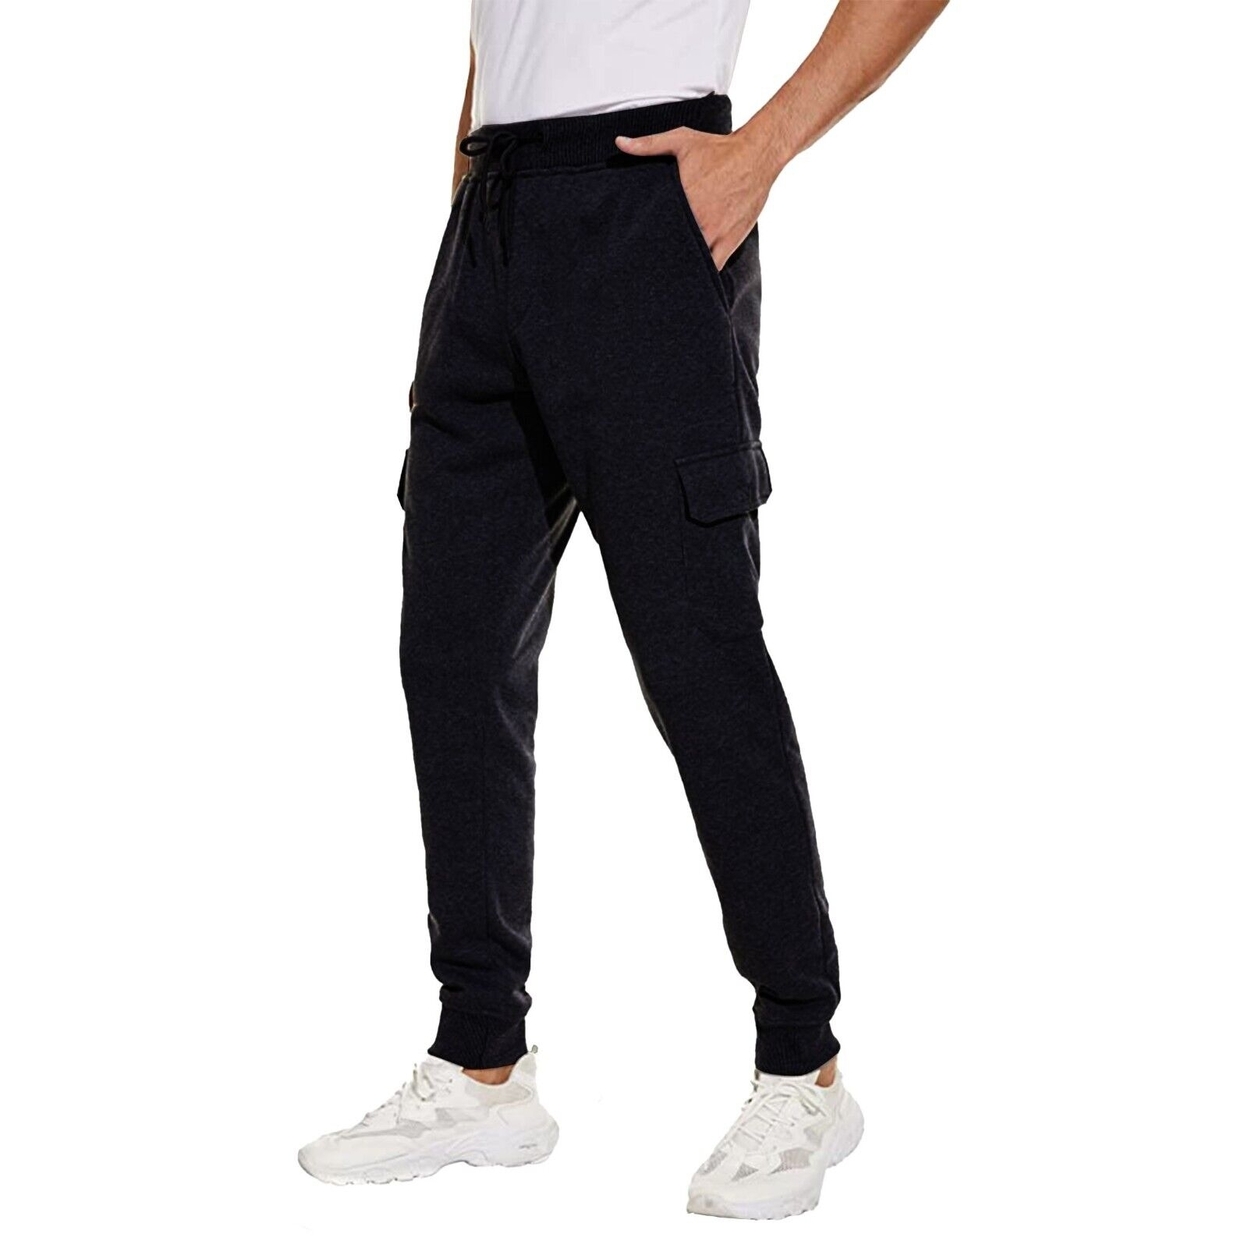 Men's Ultra Soft Winter Warm Thick Sweat Pant Athletic Sherpa Lined Jogger Pants - Navy, Small